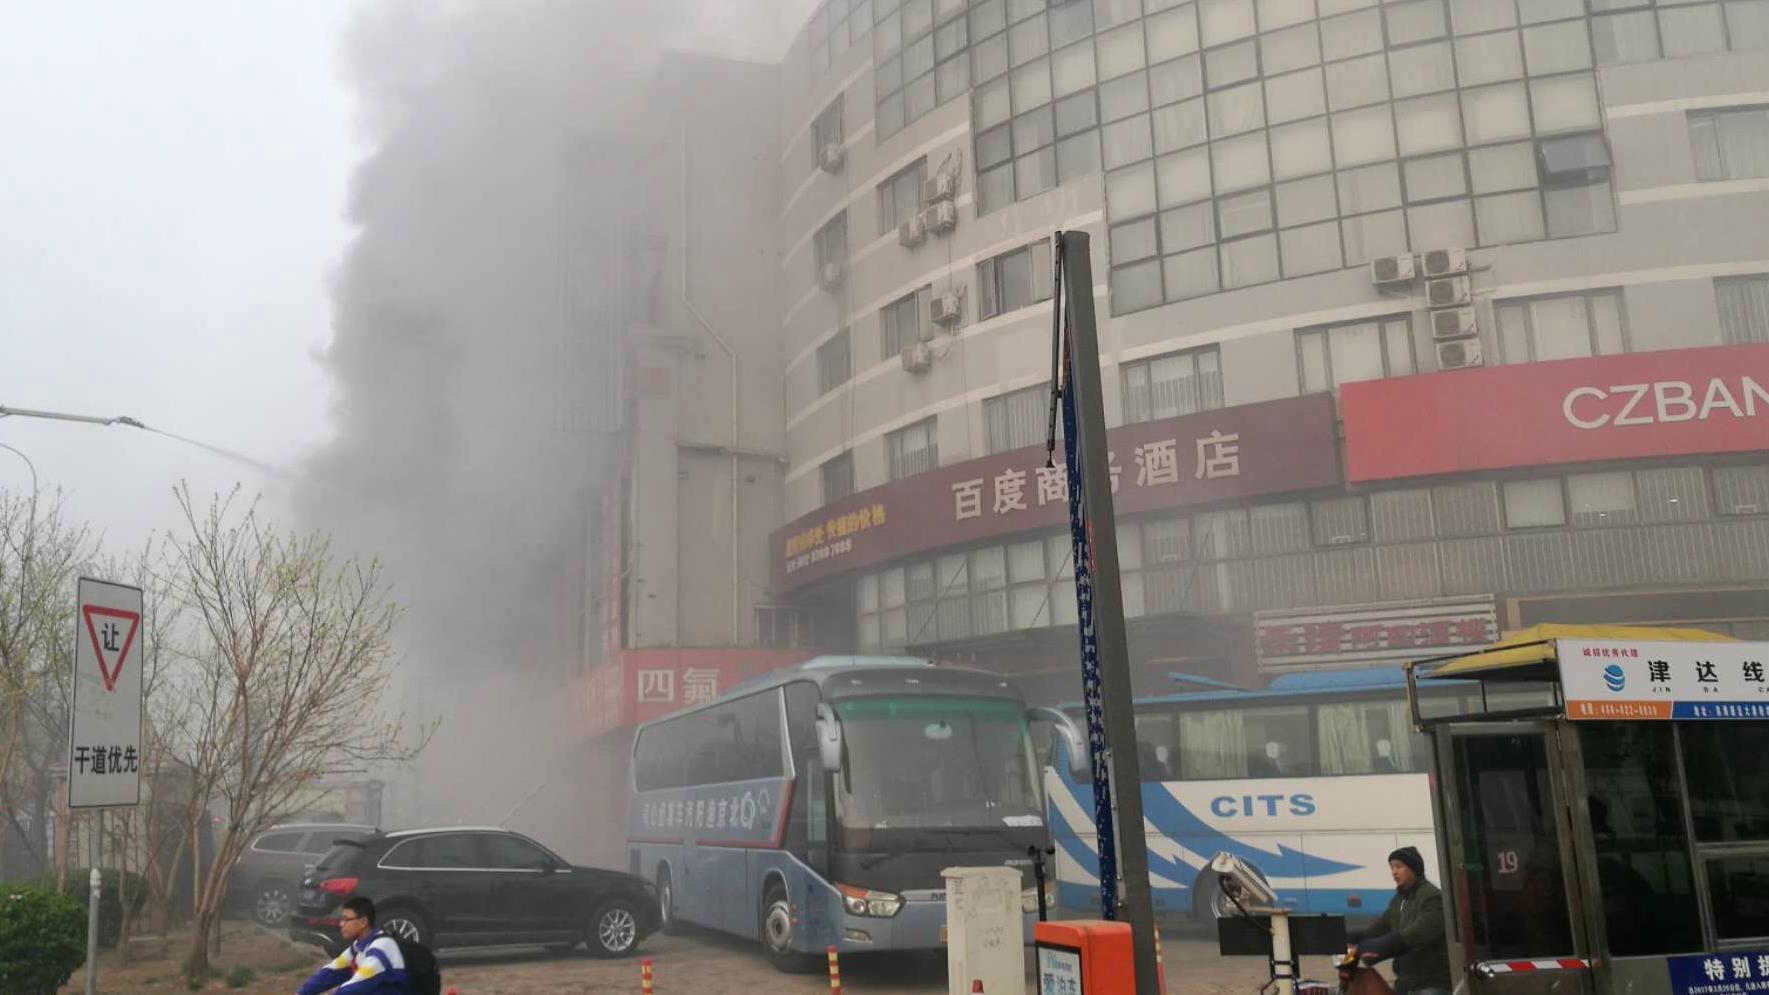 Fire breaks out at a six-story building in northern China